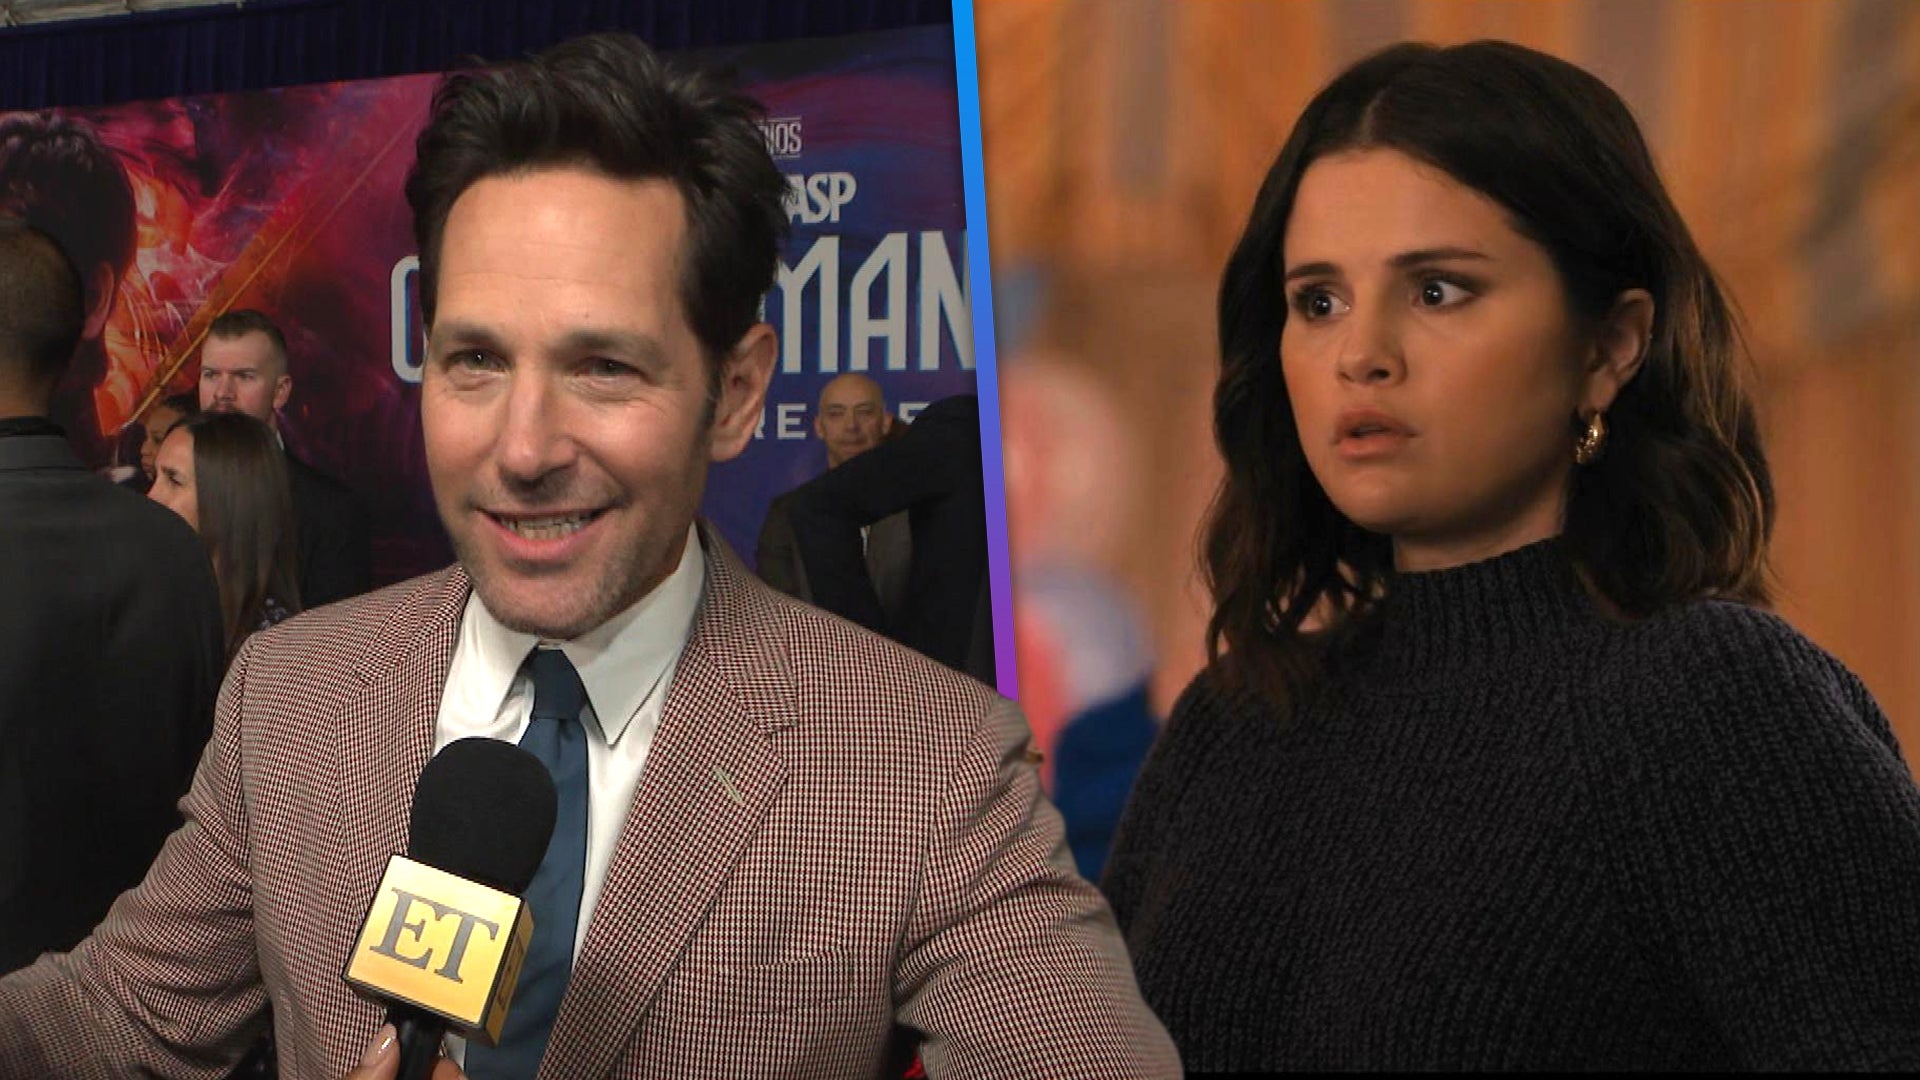 Paul Rudd 'Ant-Man' Casting Made Official